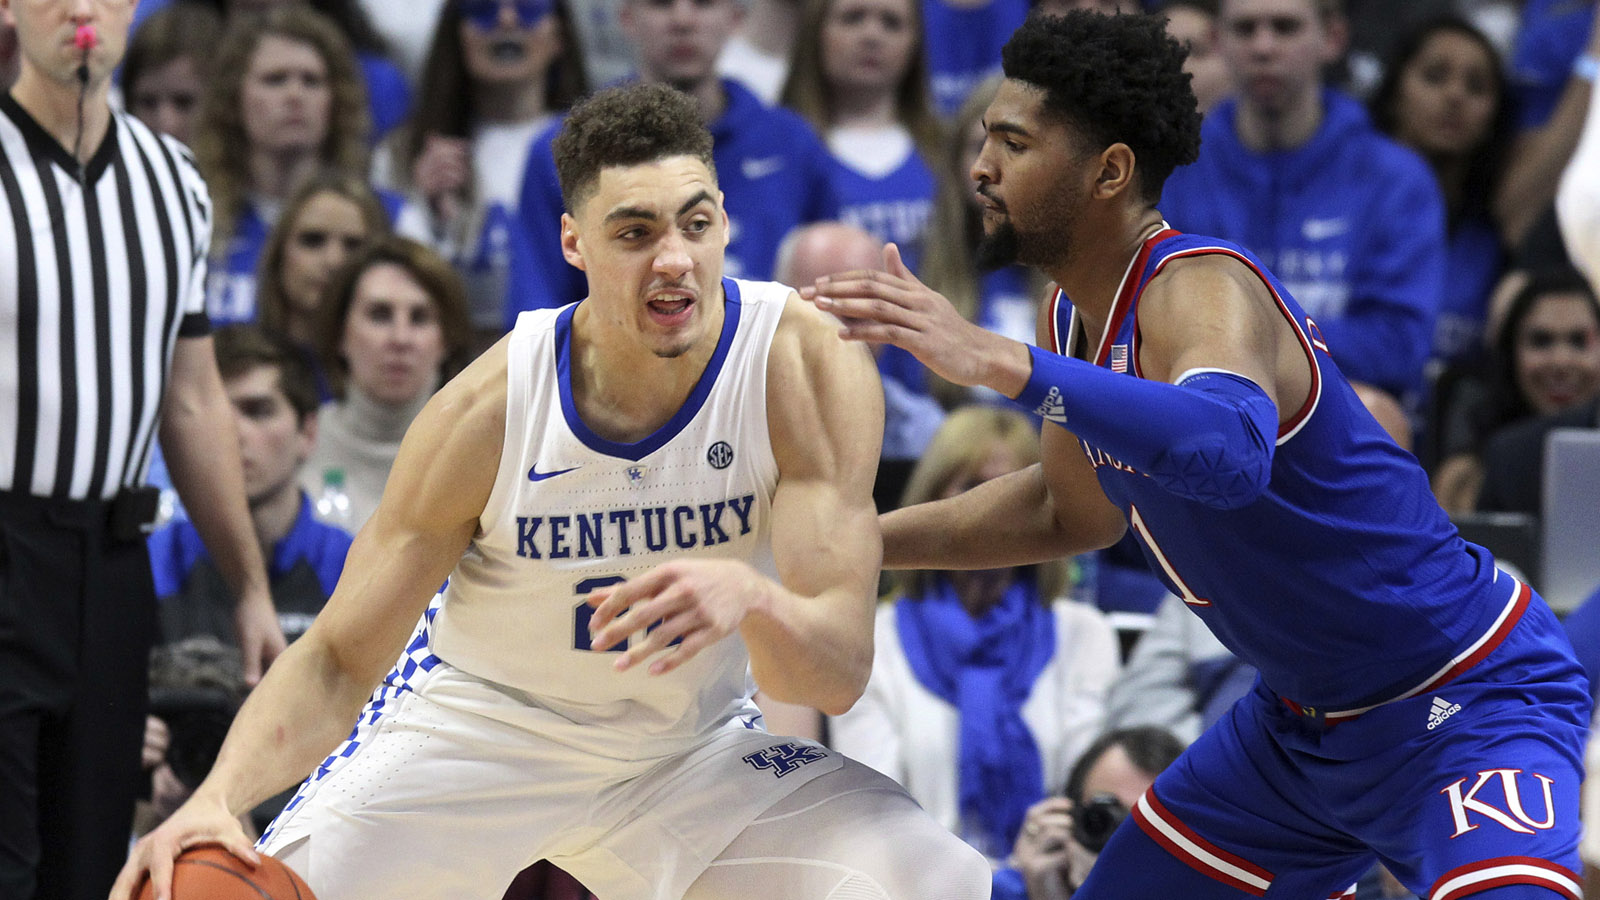 Kansas suffers second loss in three games, 71-63 to Kentucky